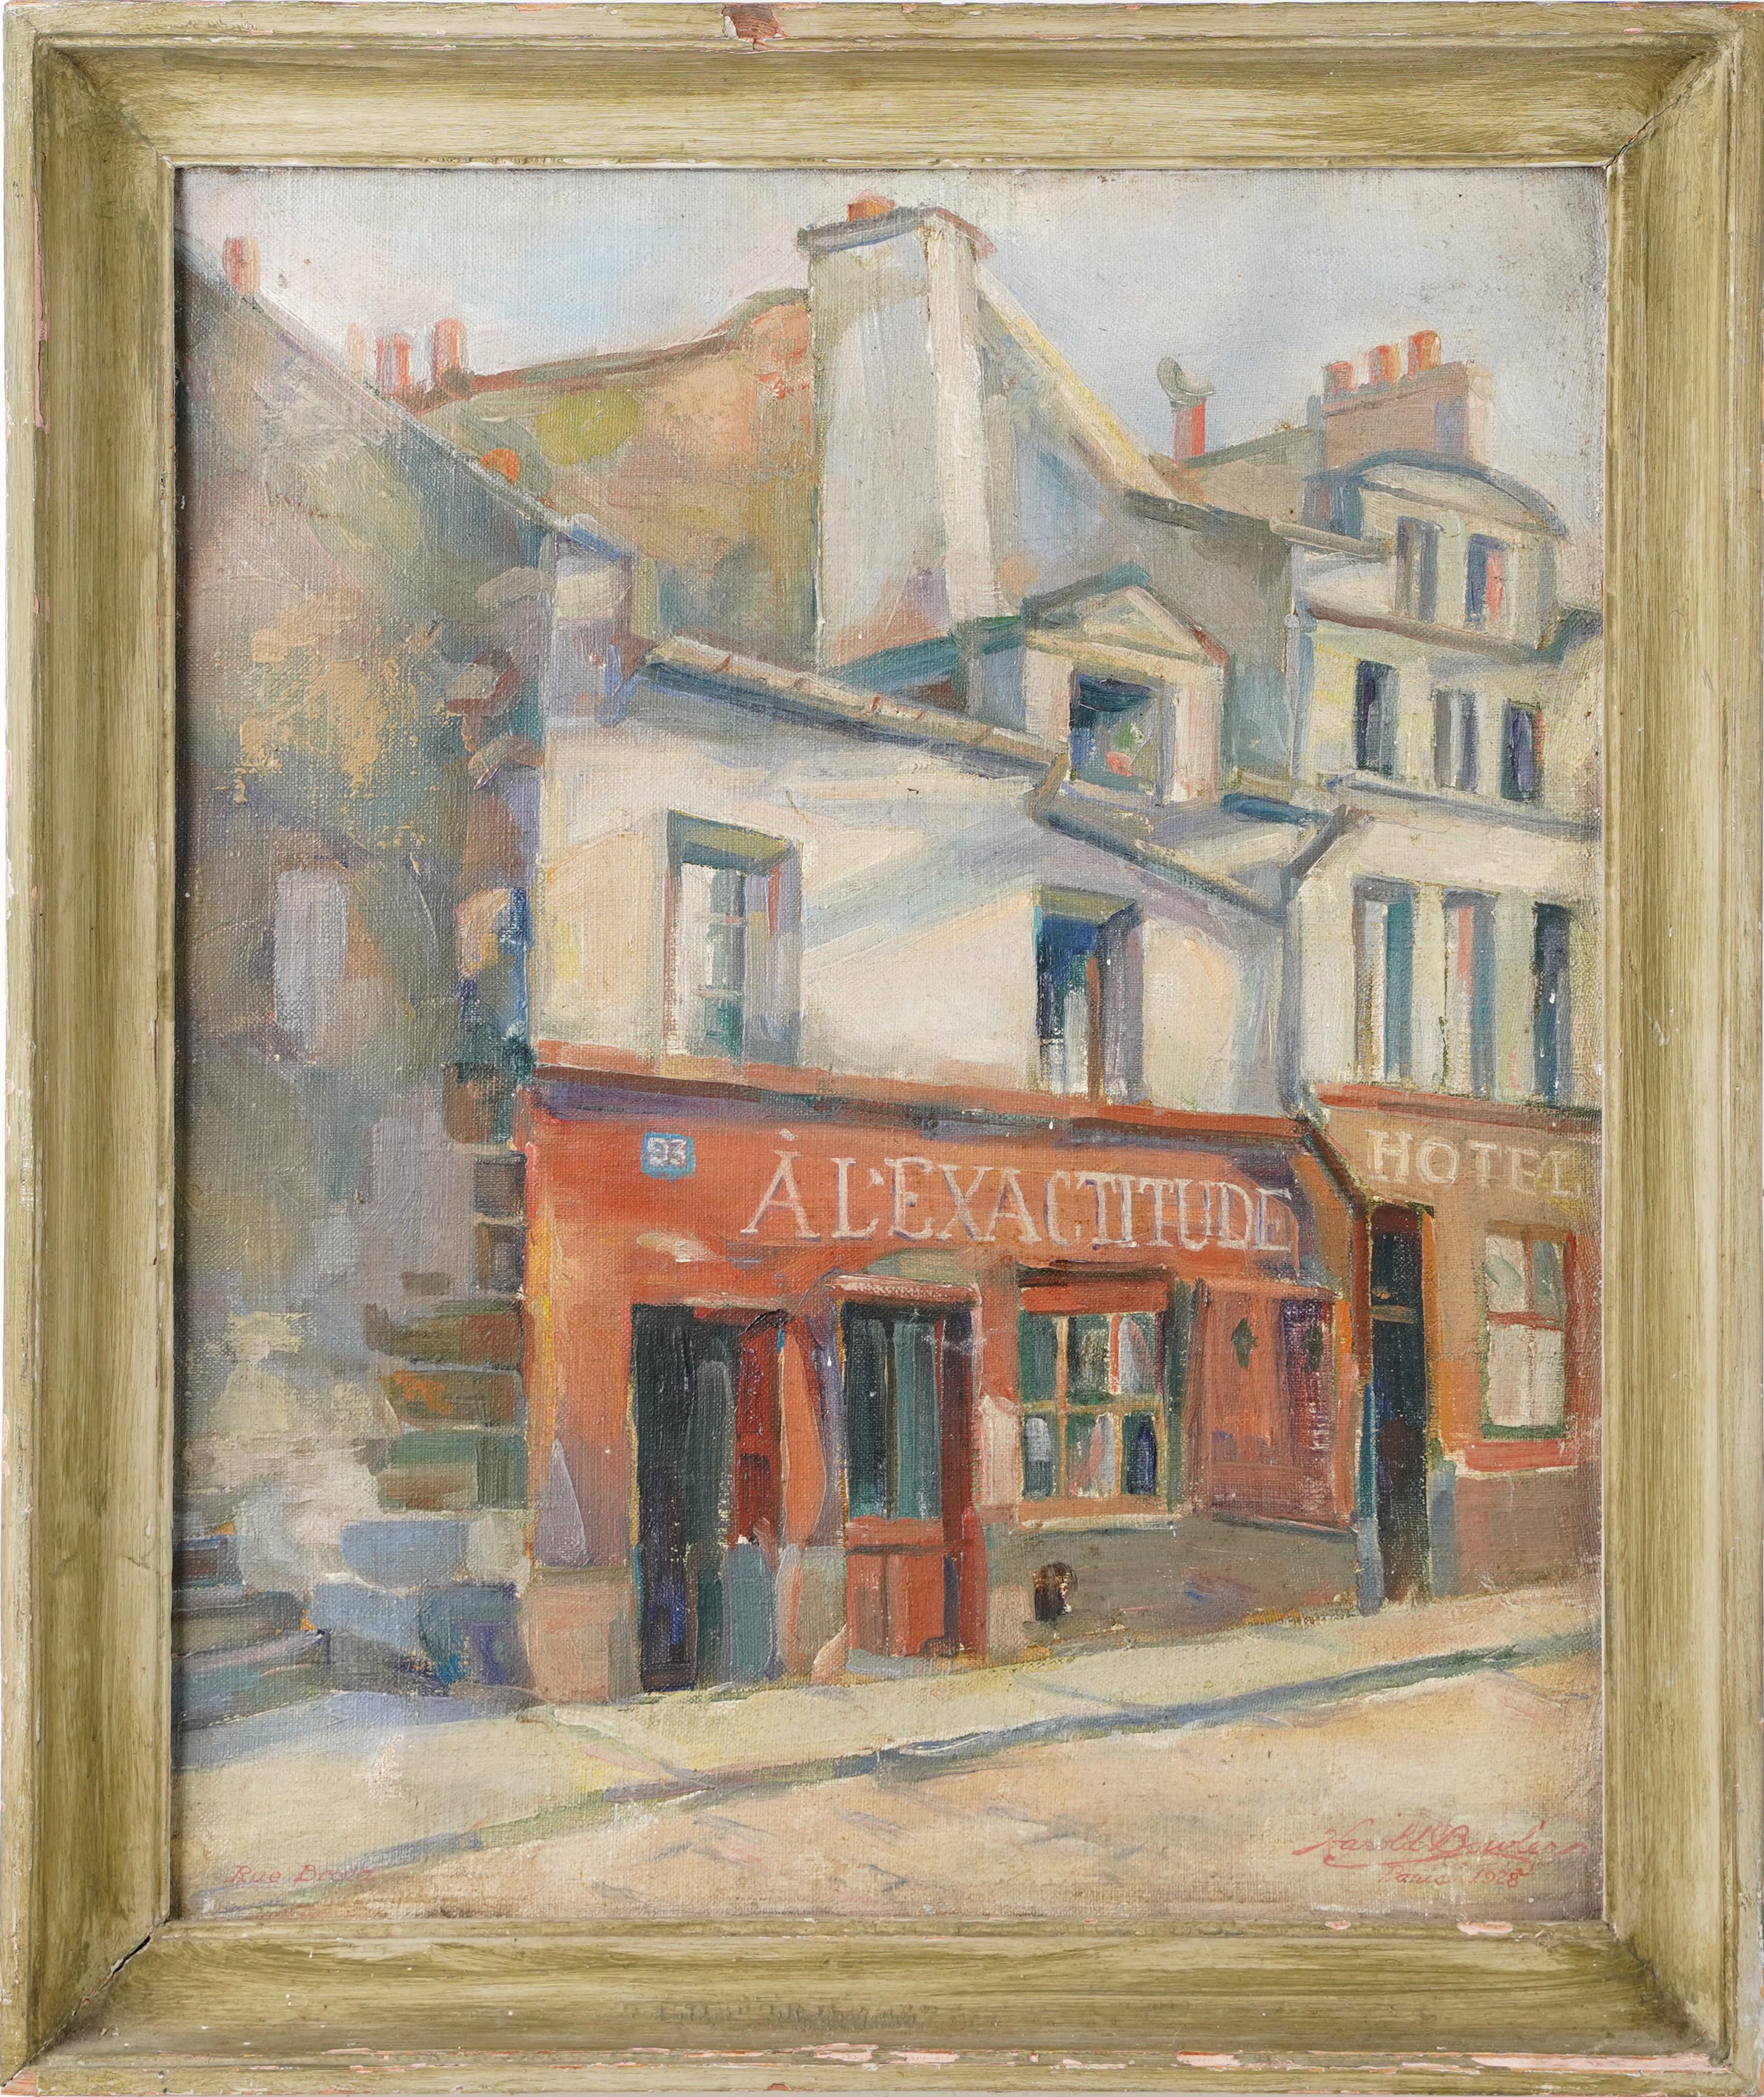  Antique American Impressionist in Paris Signed Street Scene Framed Oil Painting